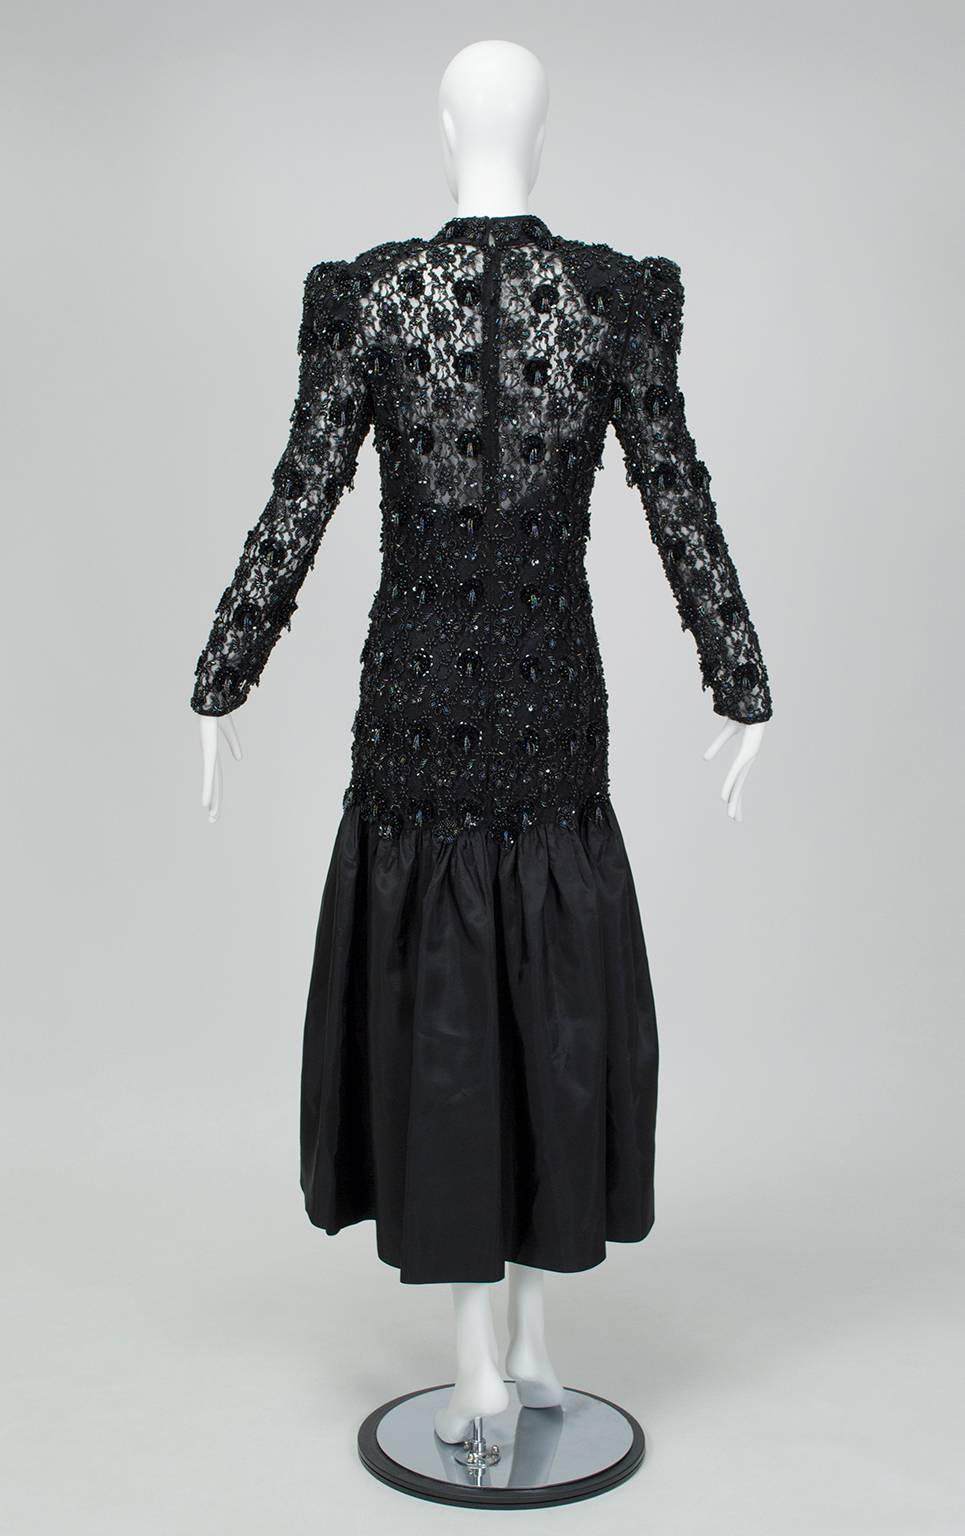 Oleg Cassini Glam Black Beaded Illusion Power Gown with Trumpet Skirt - S, 1980s In Excellent Condition For Sale In Tucson, AZ